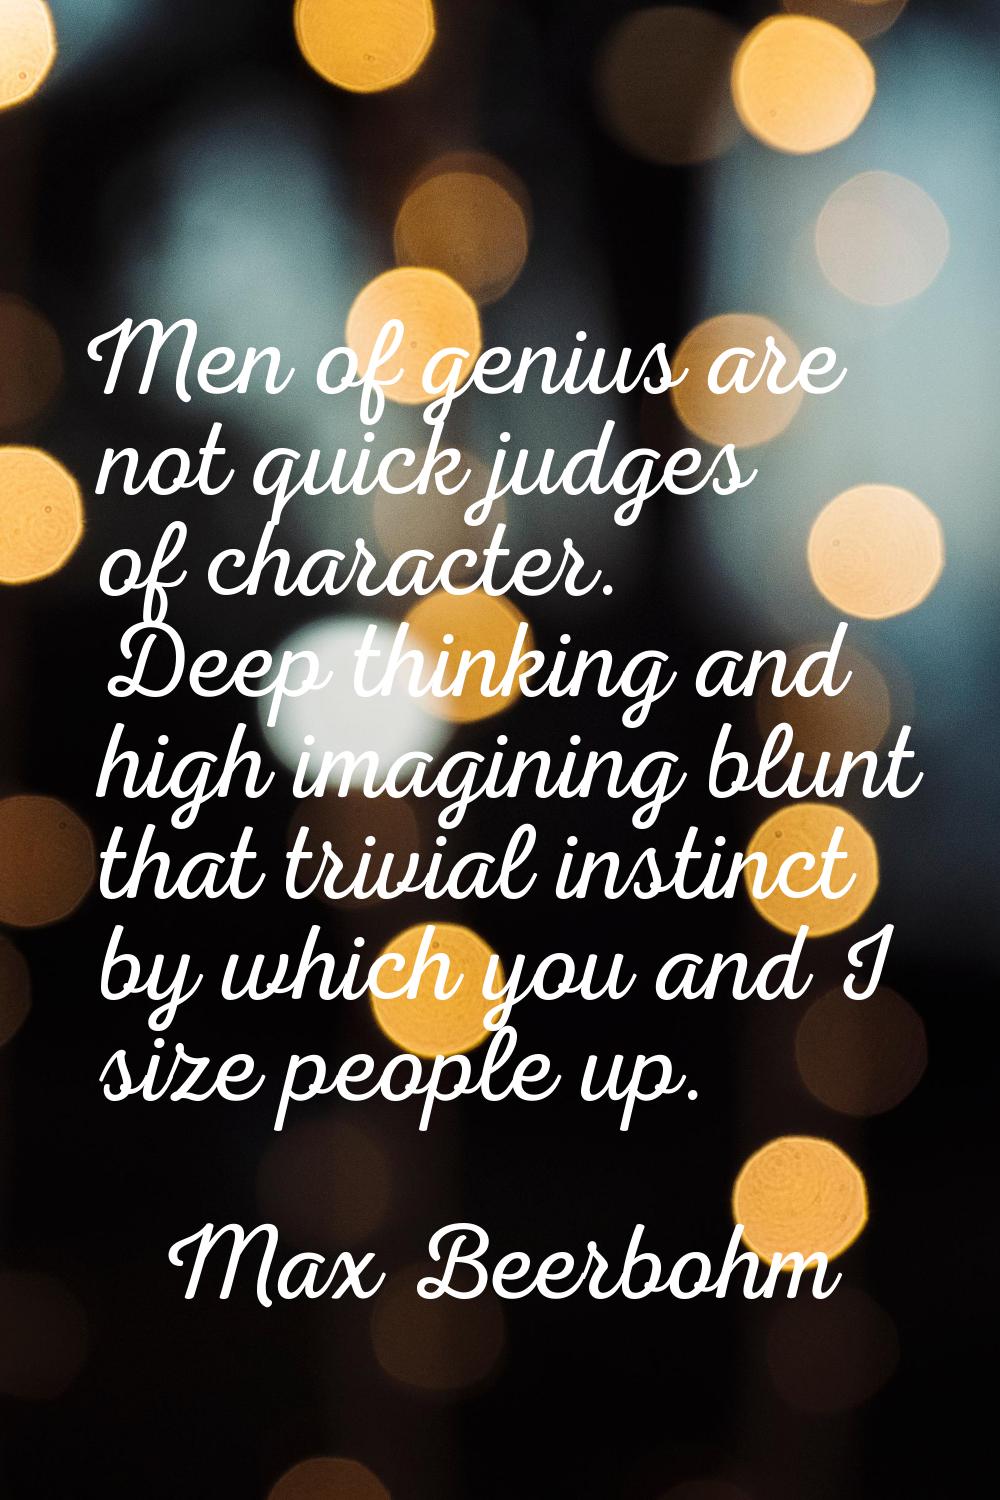 Men of genius are not quick judges of character. Deep thinking and high imagining blunt that trivia